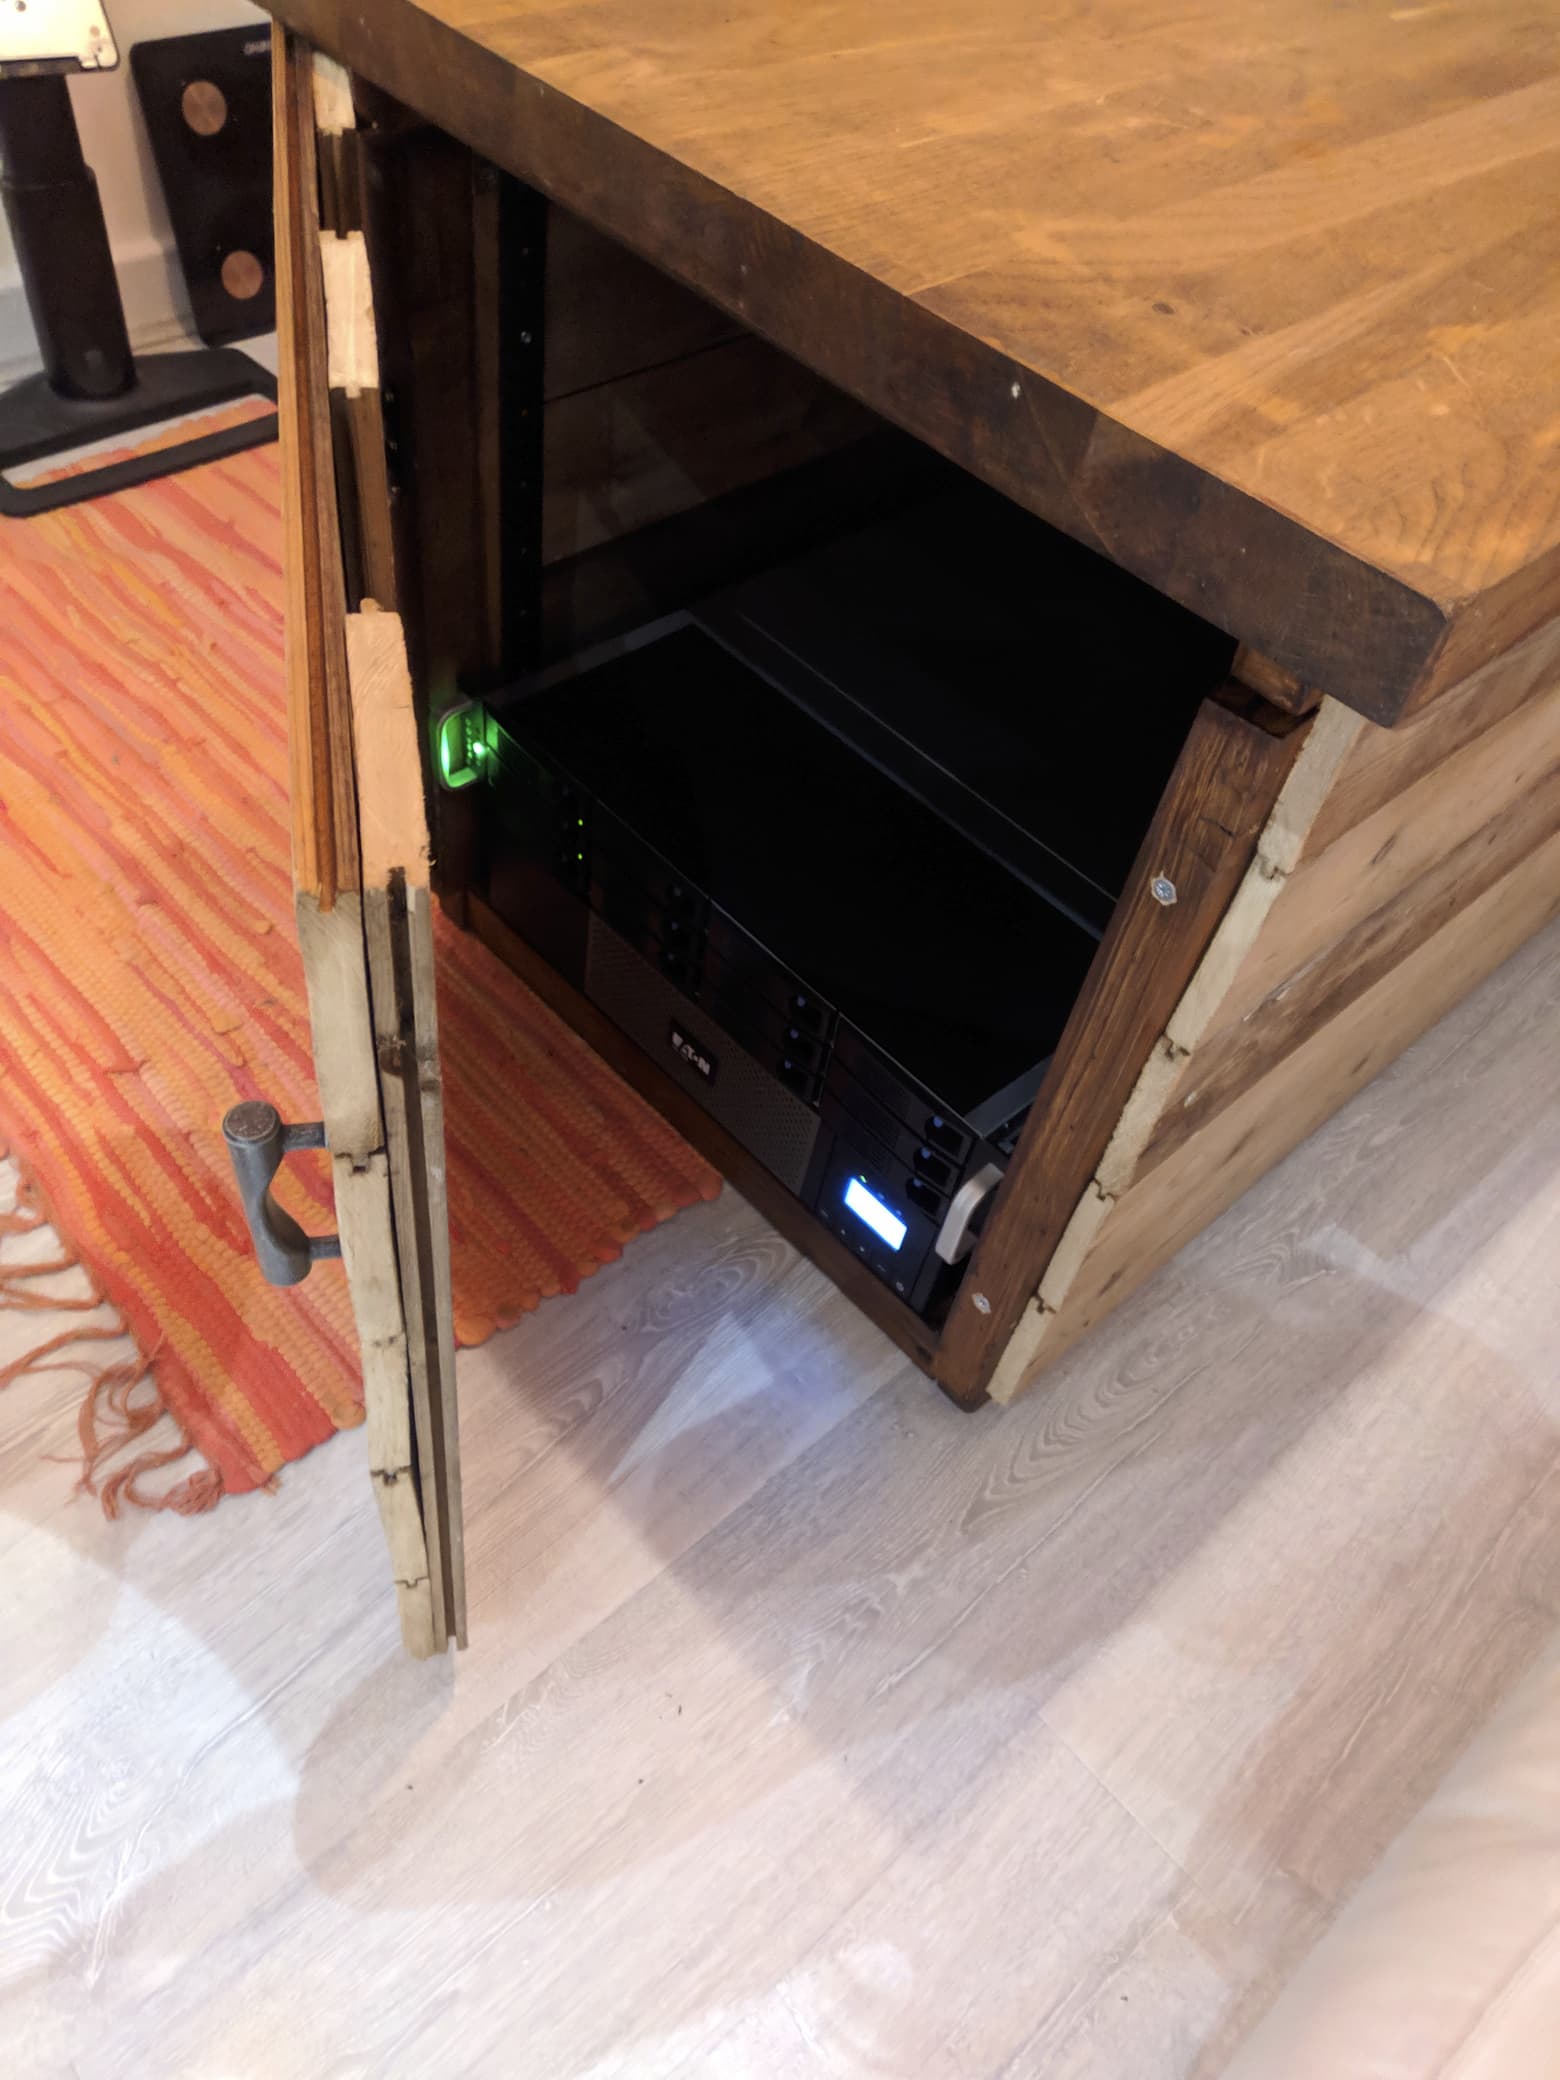 The server cabinet in-use, with the hug server and a UPS mounted inside